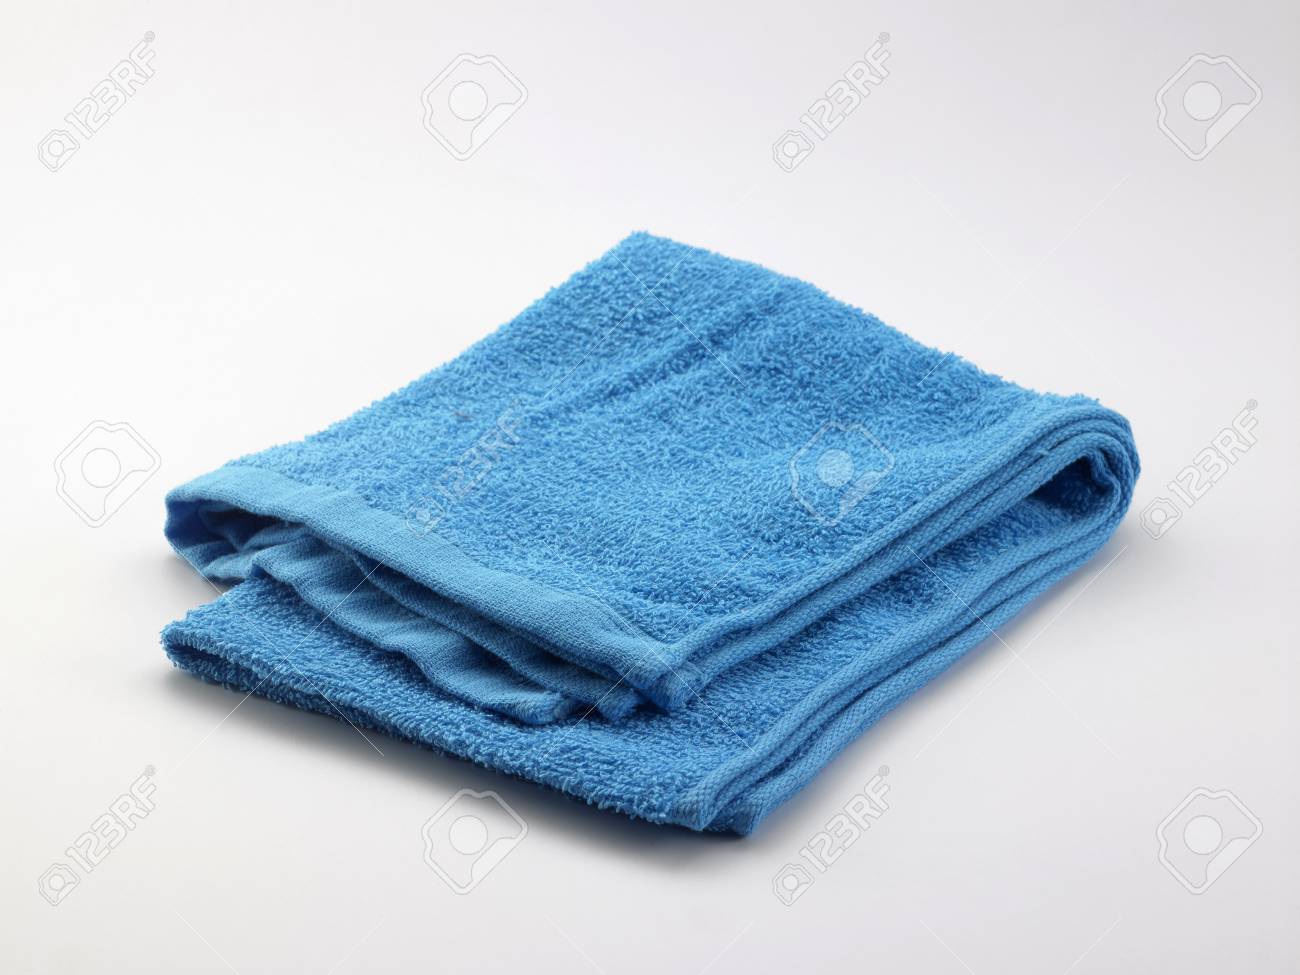 Folded Towel Isolated On White Background Stock Photo Picture And